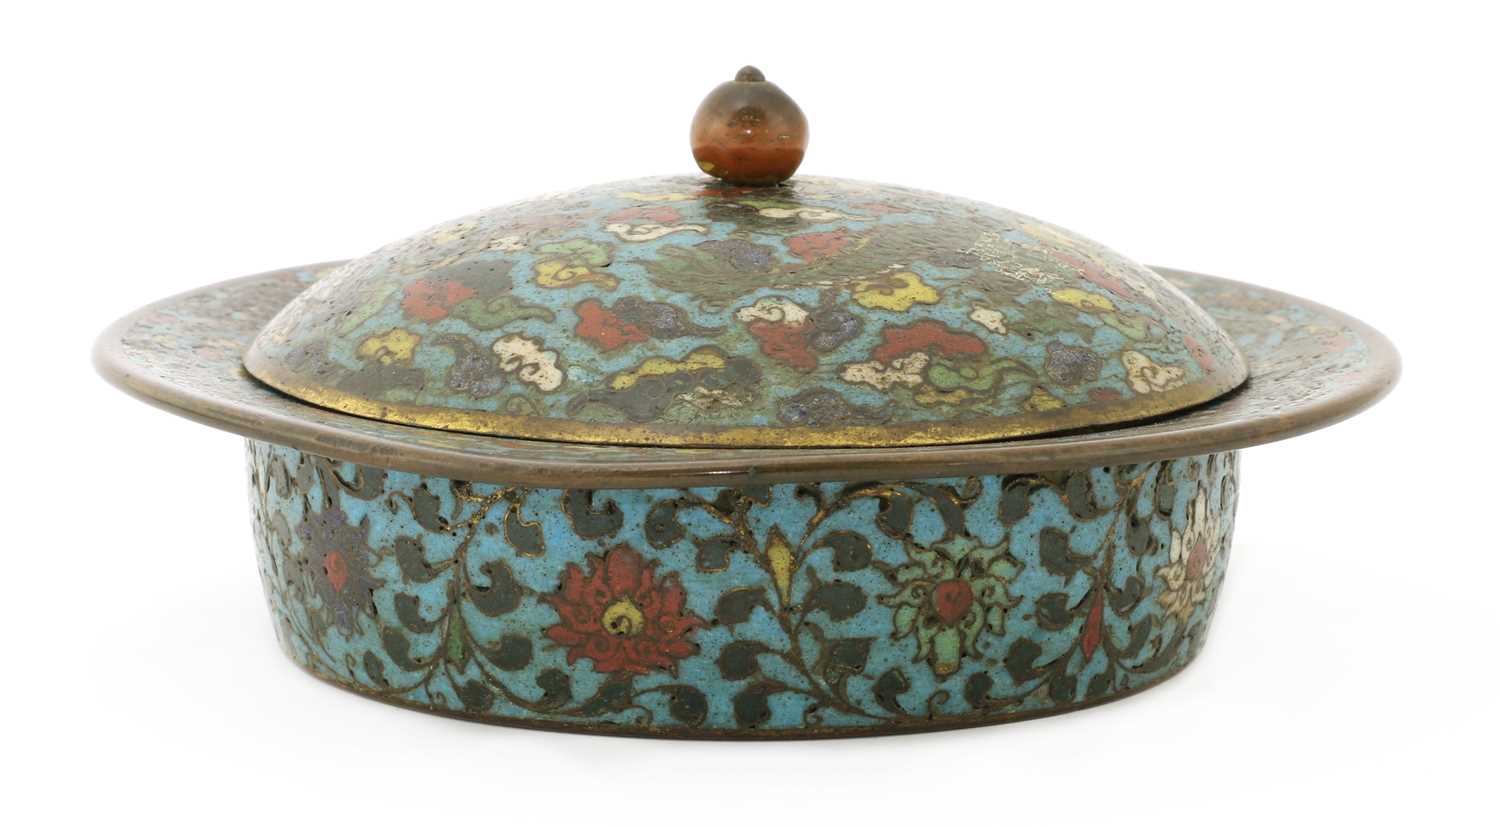 Lot 163 - A Chinese cloisonné zhadou and cover